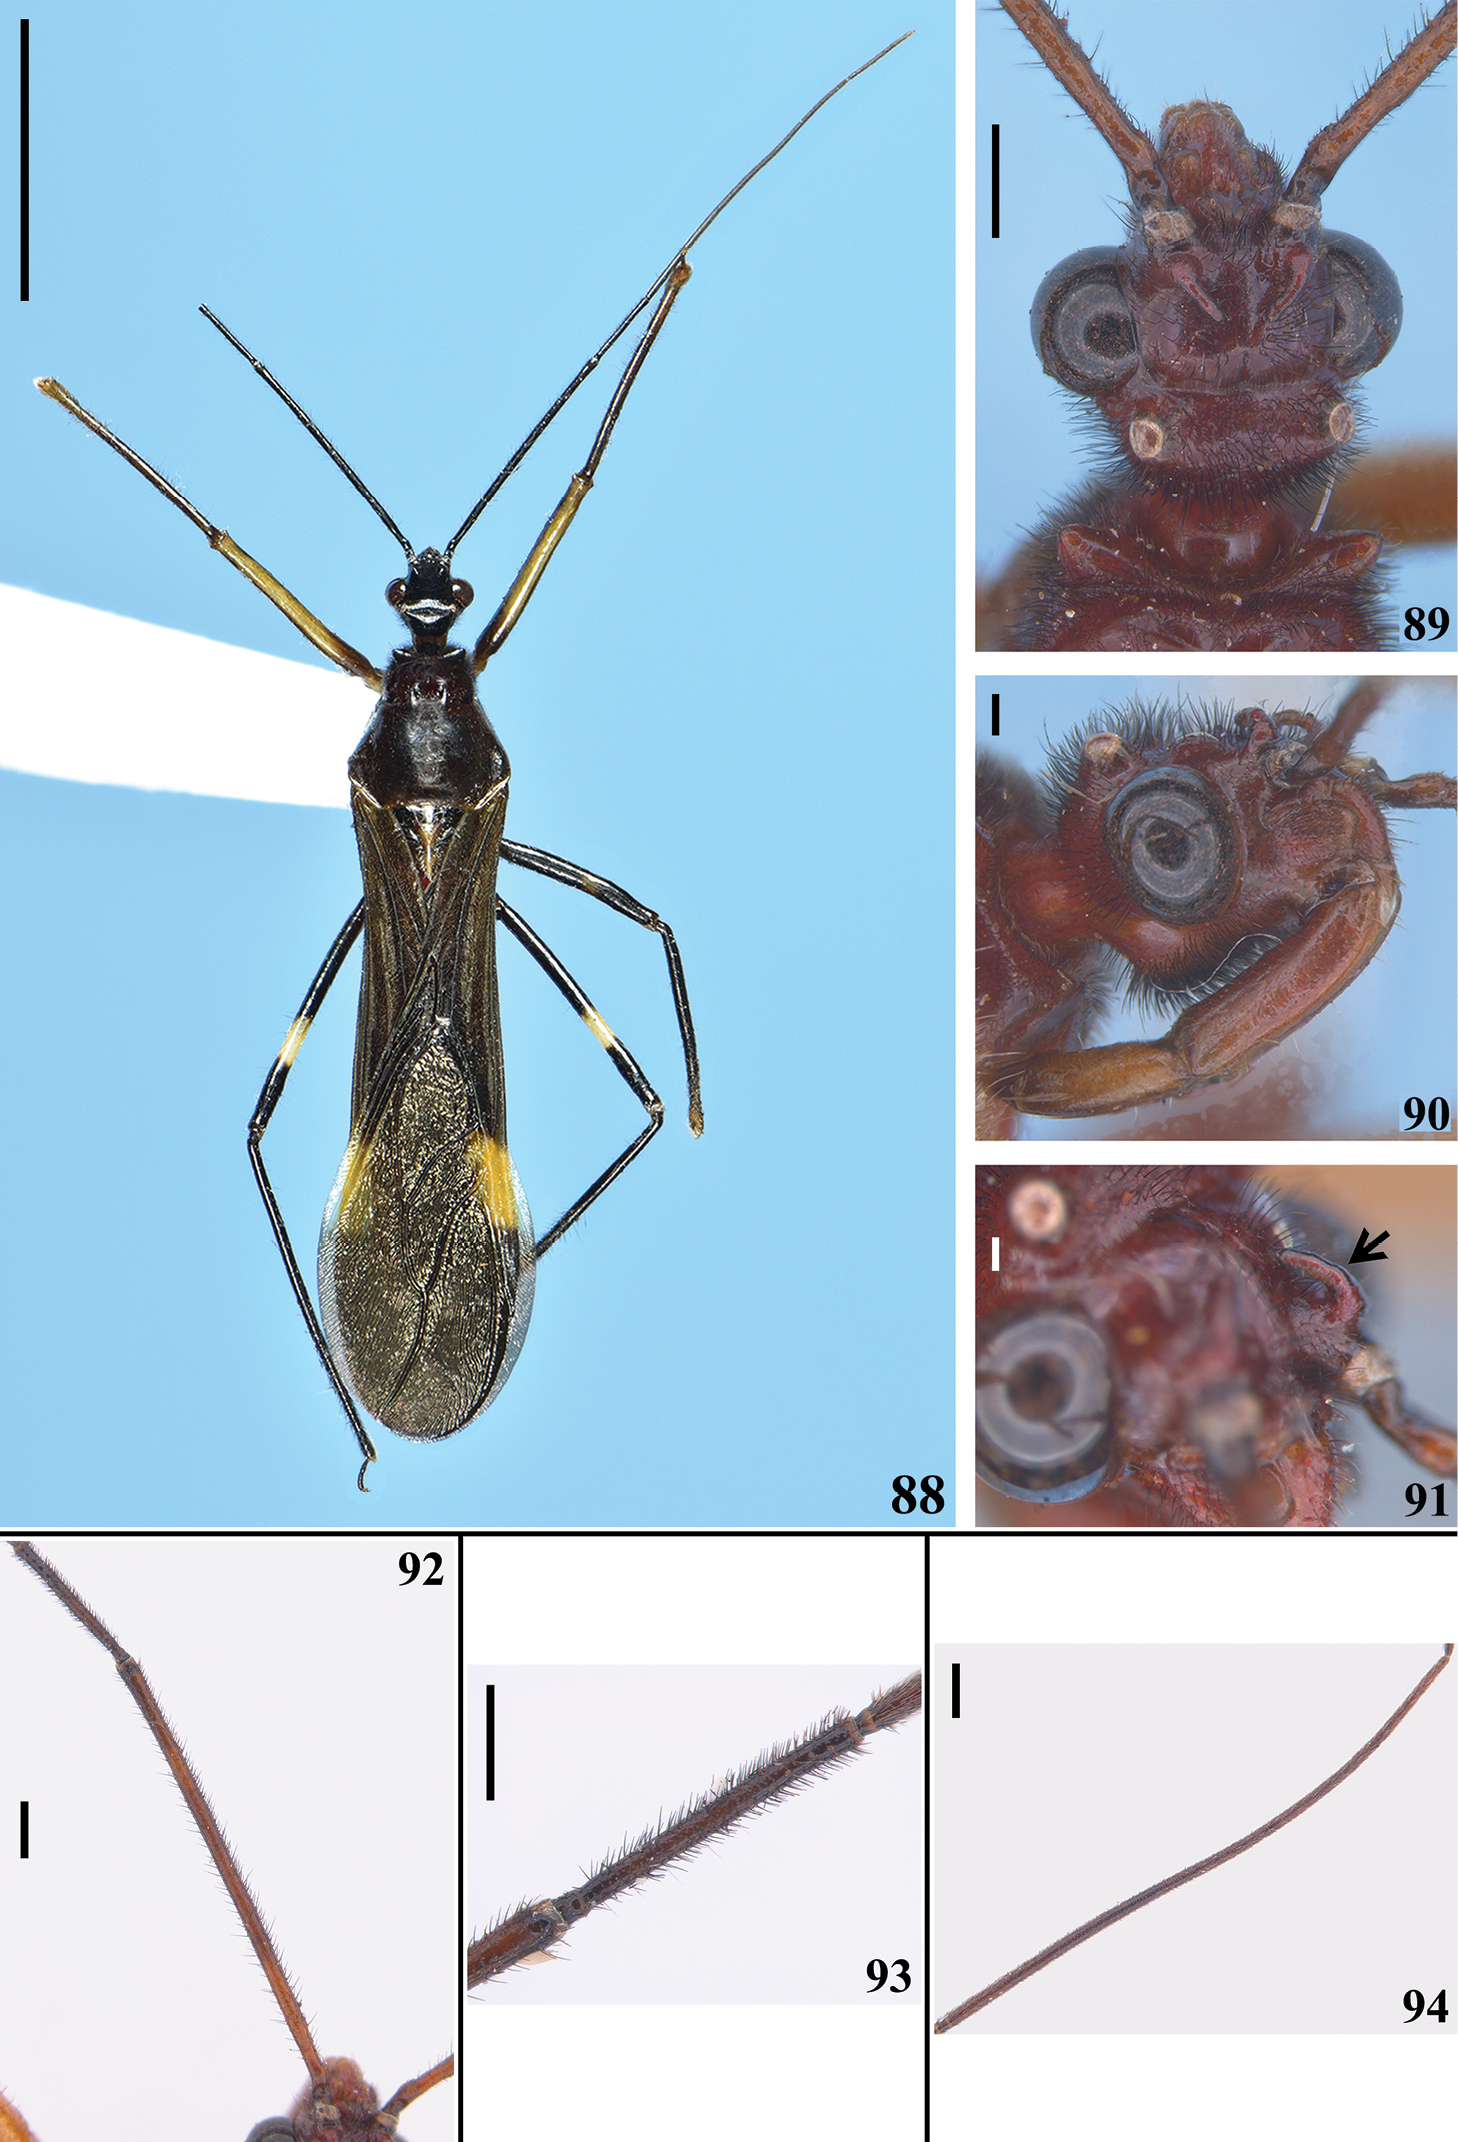 ﻿a New Genus And A New Species Of Wasp Mimicking Harpactorini